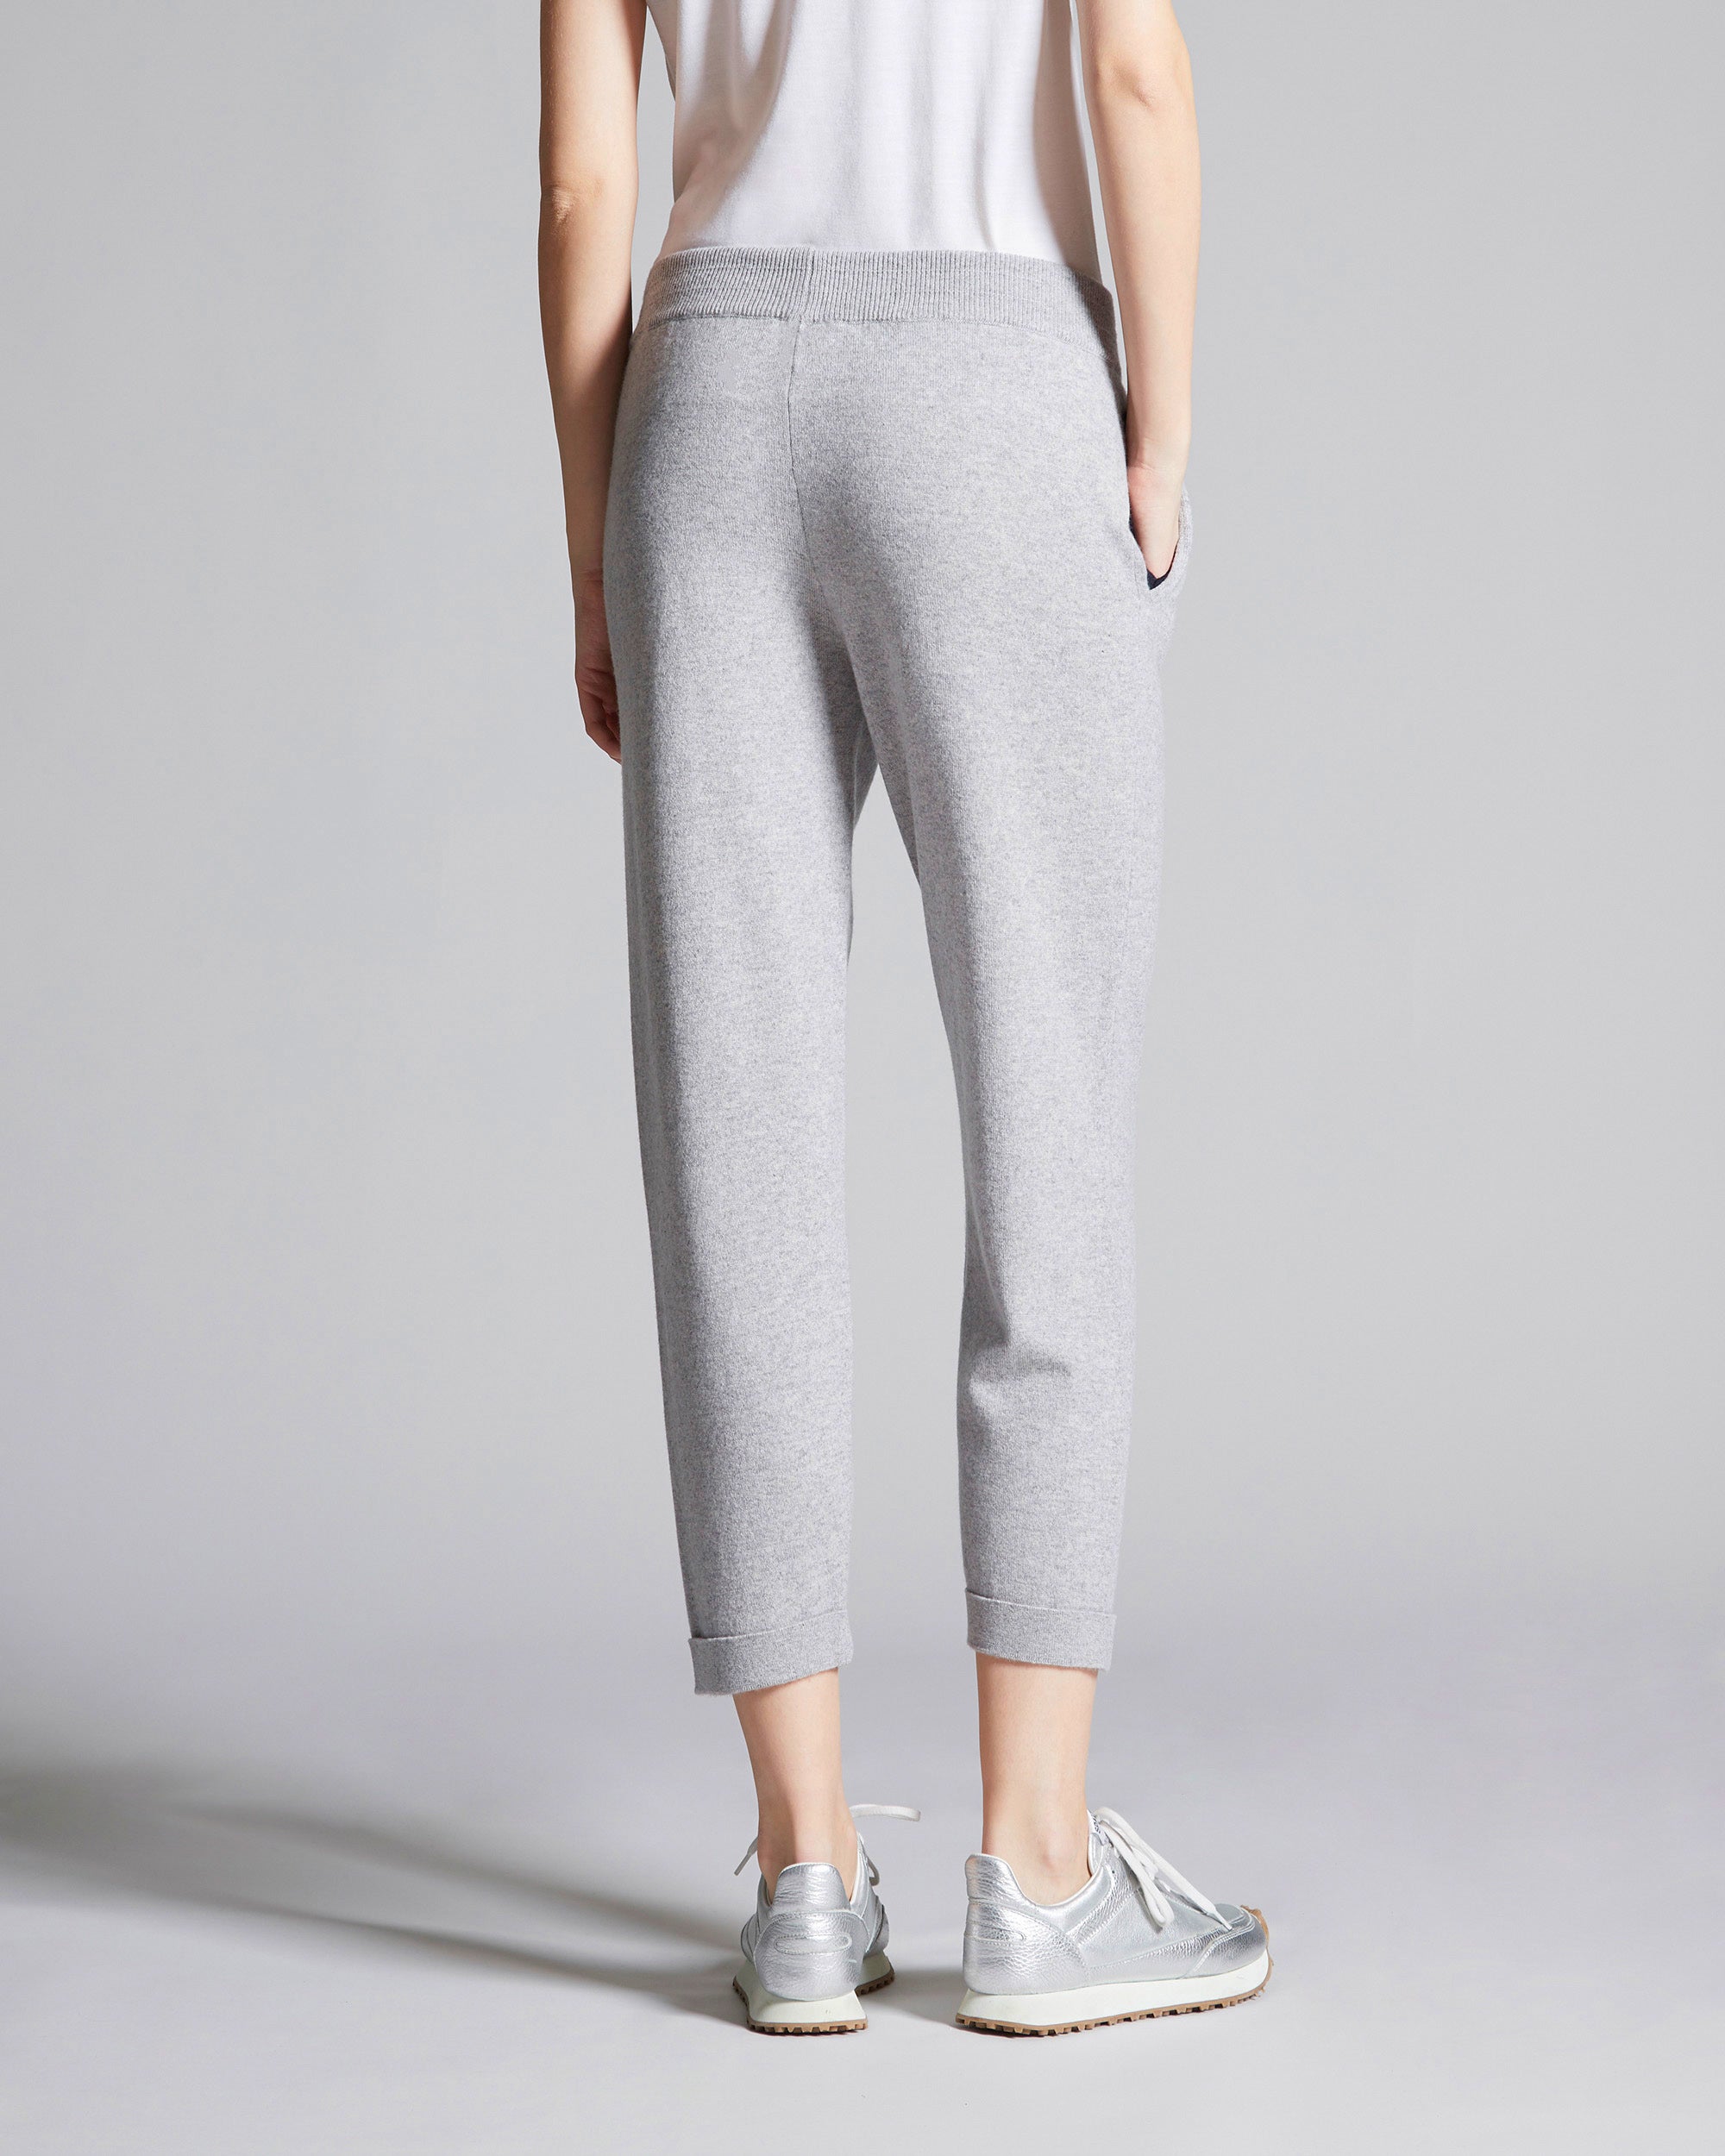 Pearl grey Kid Cashmere jogging pants with cashmere and silk profiles